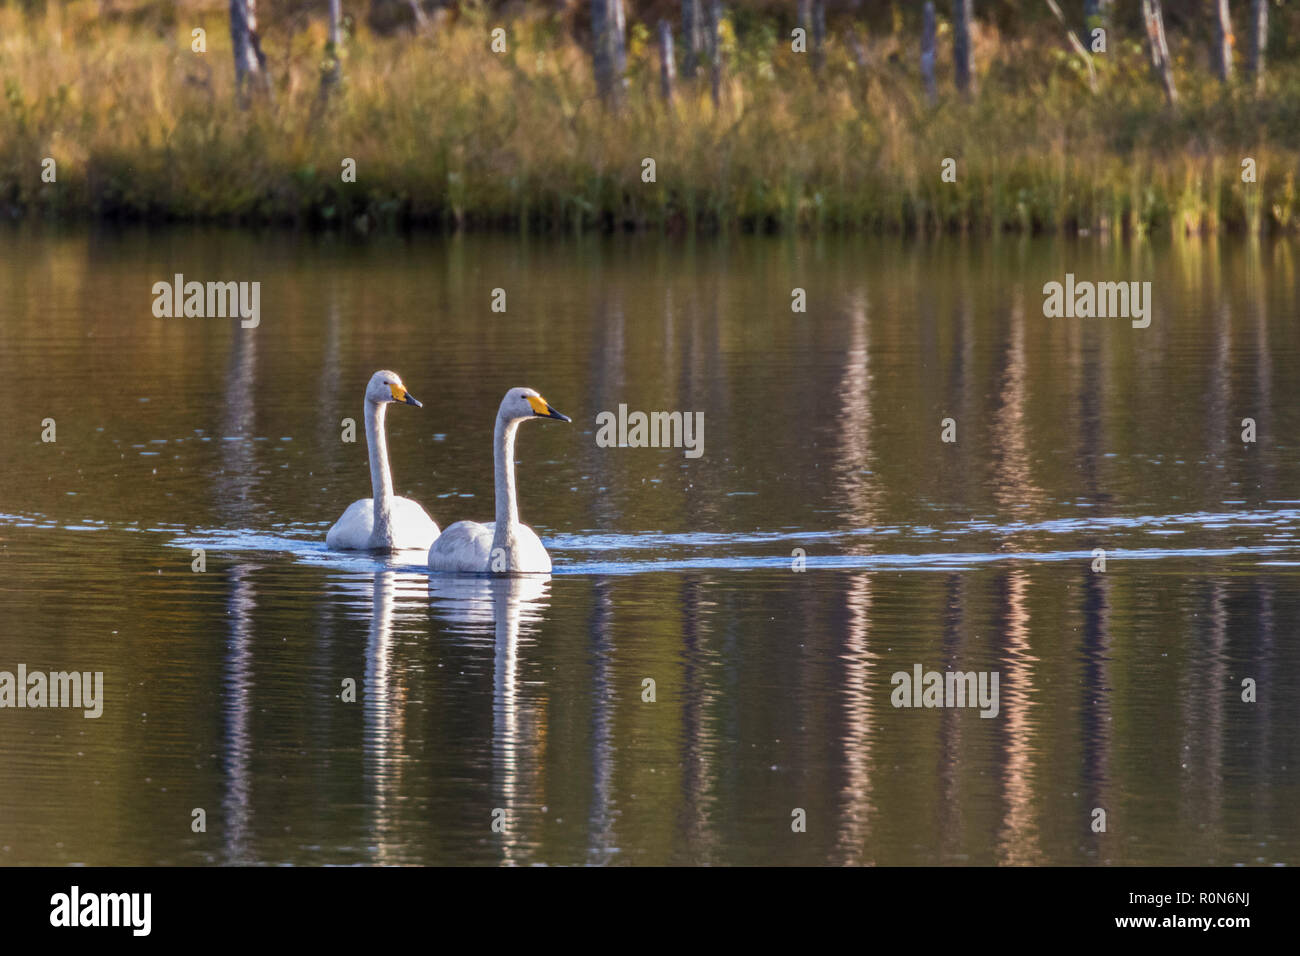 Two Whooper swans, Cygnus cygnus, swimming in a lake and the trees reflecting in the water, Gällivare county, Swedish Lapland, Sweden Stock Photo